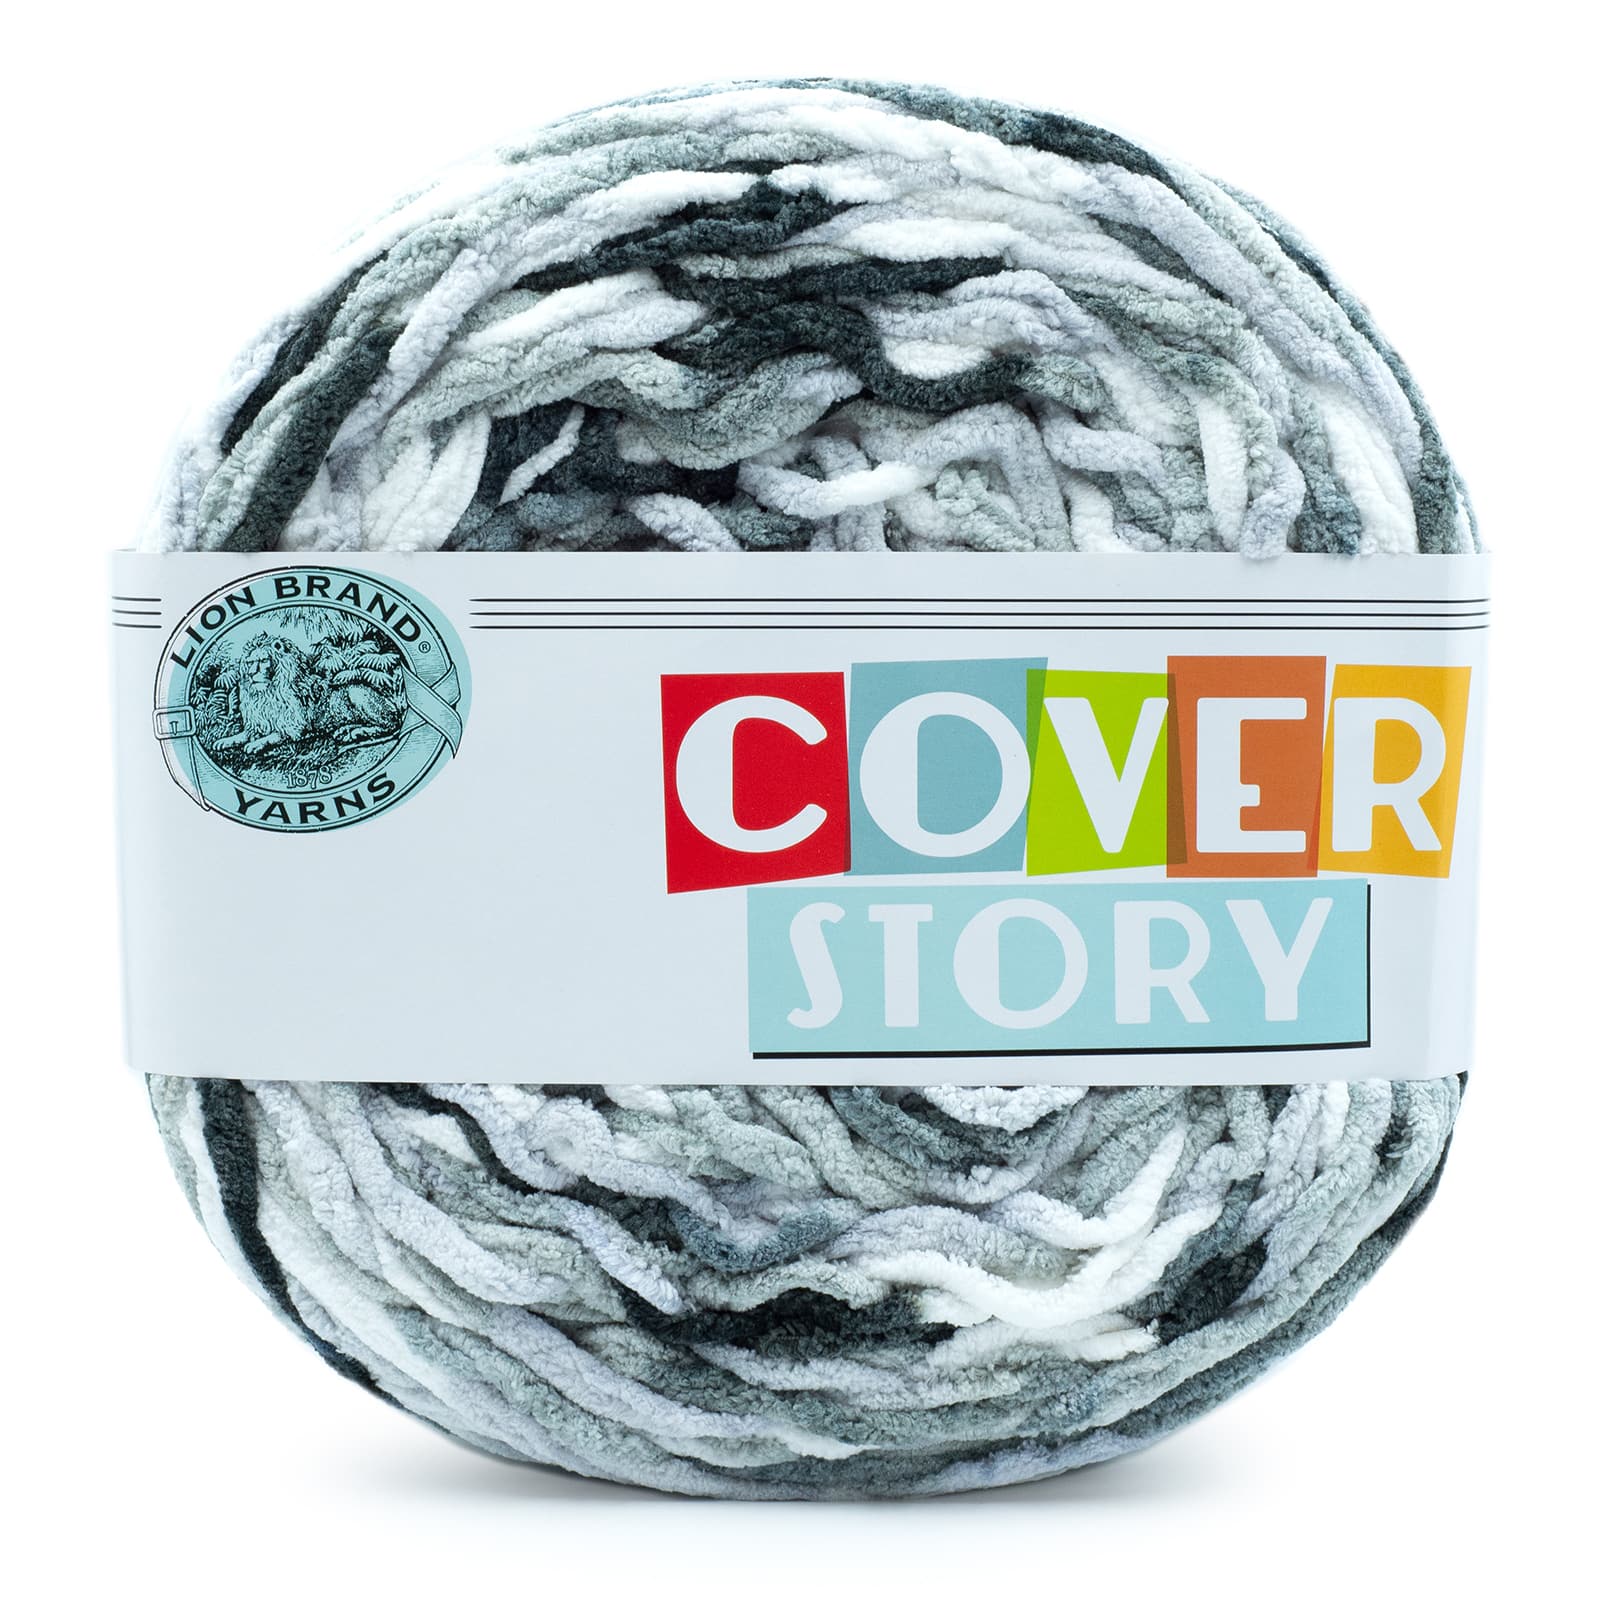 Lion BRAND Cover Story Yarn Cameo 023032063973 for sale online